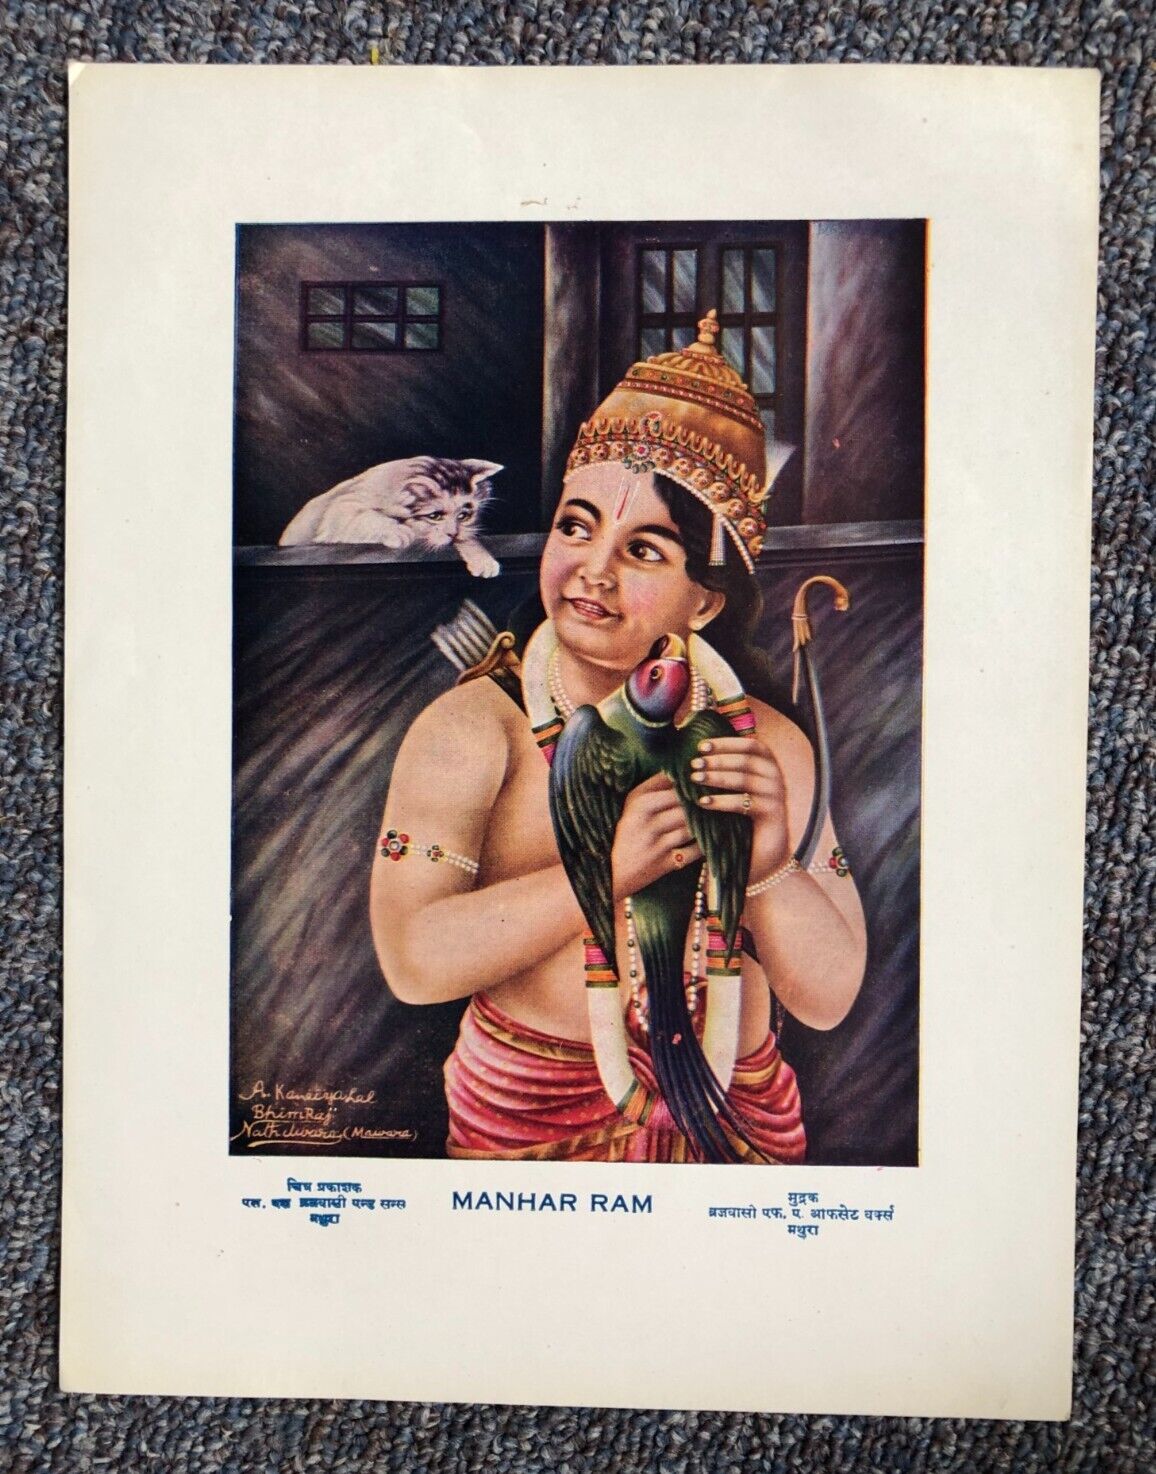 (1059) Rare Antique Hindu Art Print from India, c. 1940s: Young Lord Rama